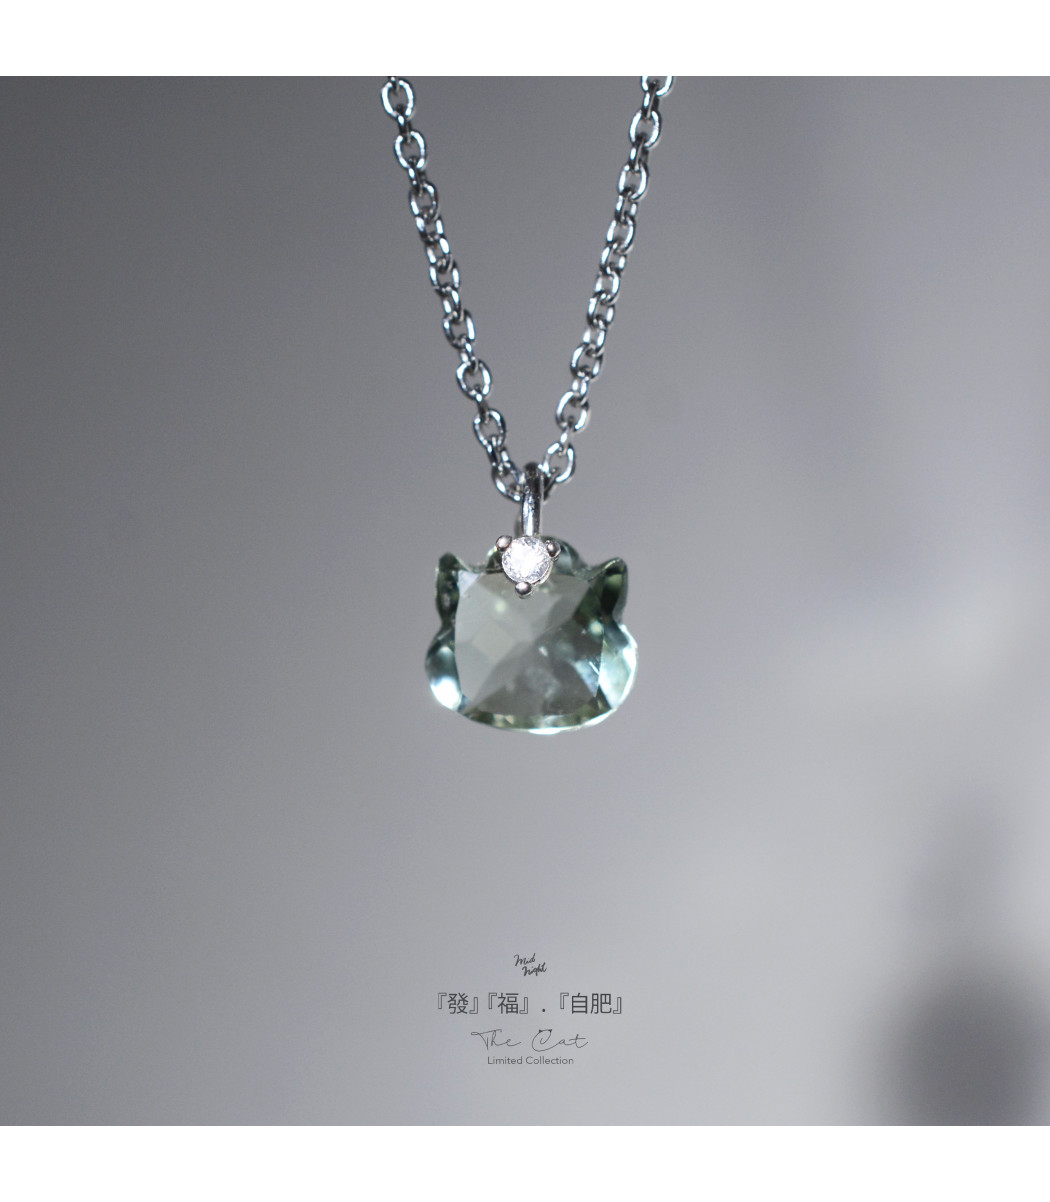 Limited Collection-Fat Cat Green Amethyst Necklace